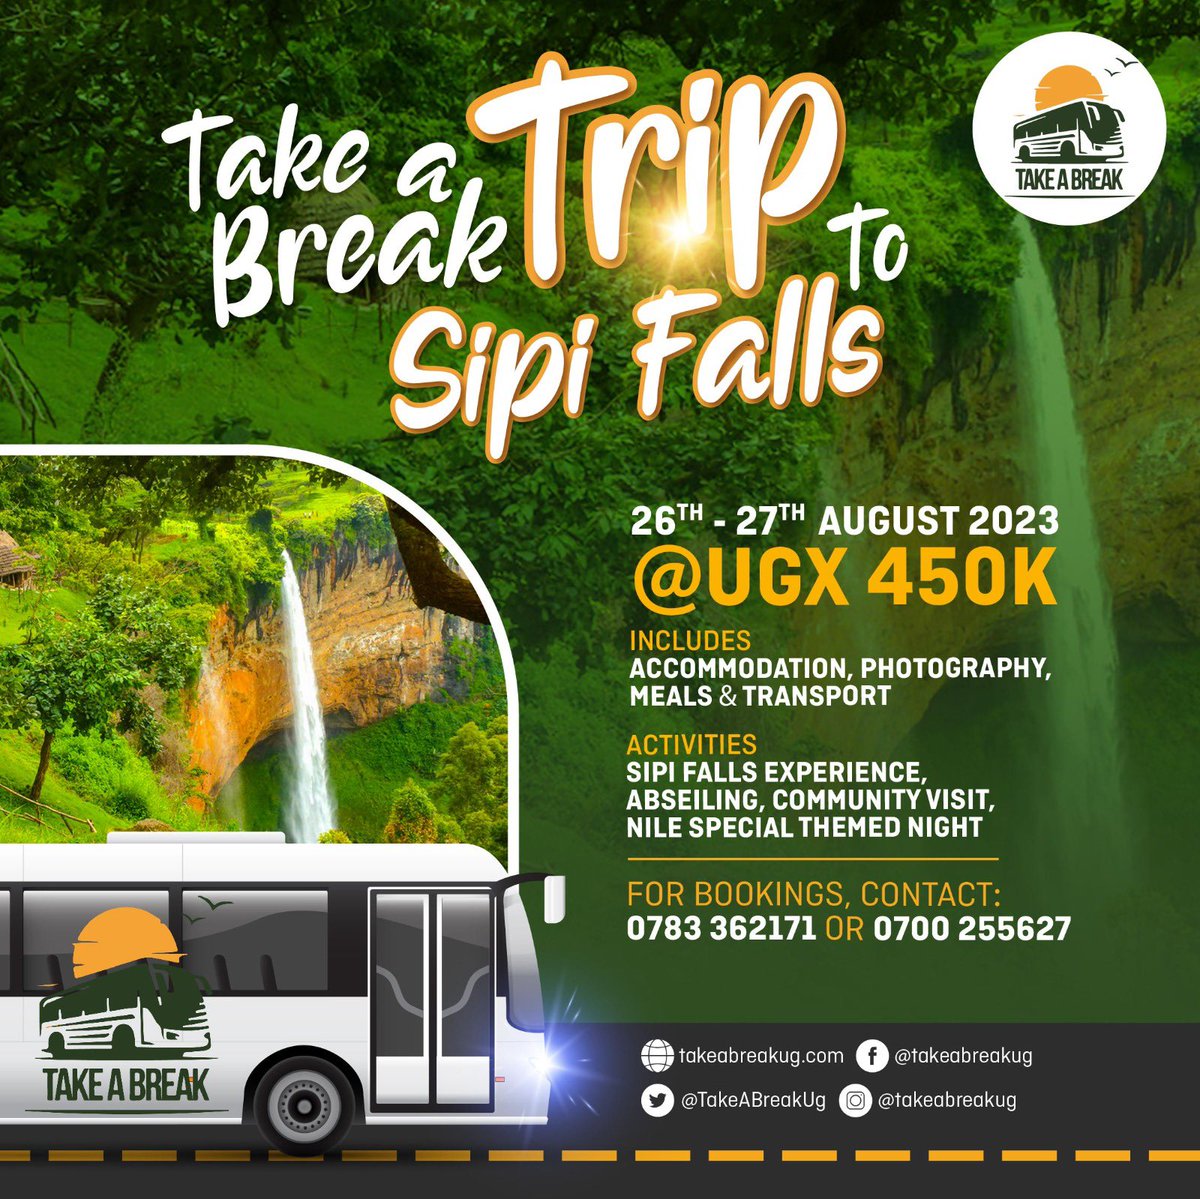 Remember to send in your #TakeABreak installments 🥳 so you don’t misss out on THEE trip to sipi next month 🔥